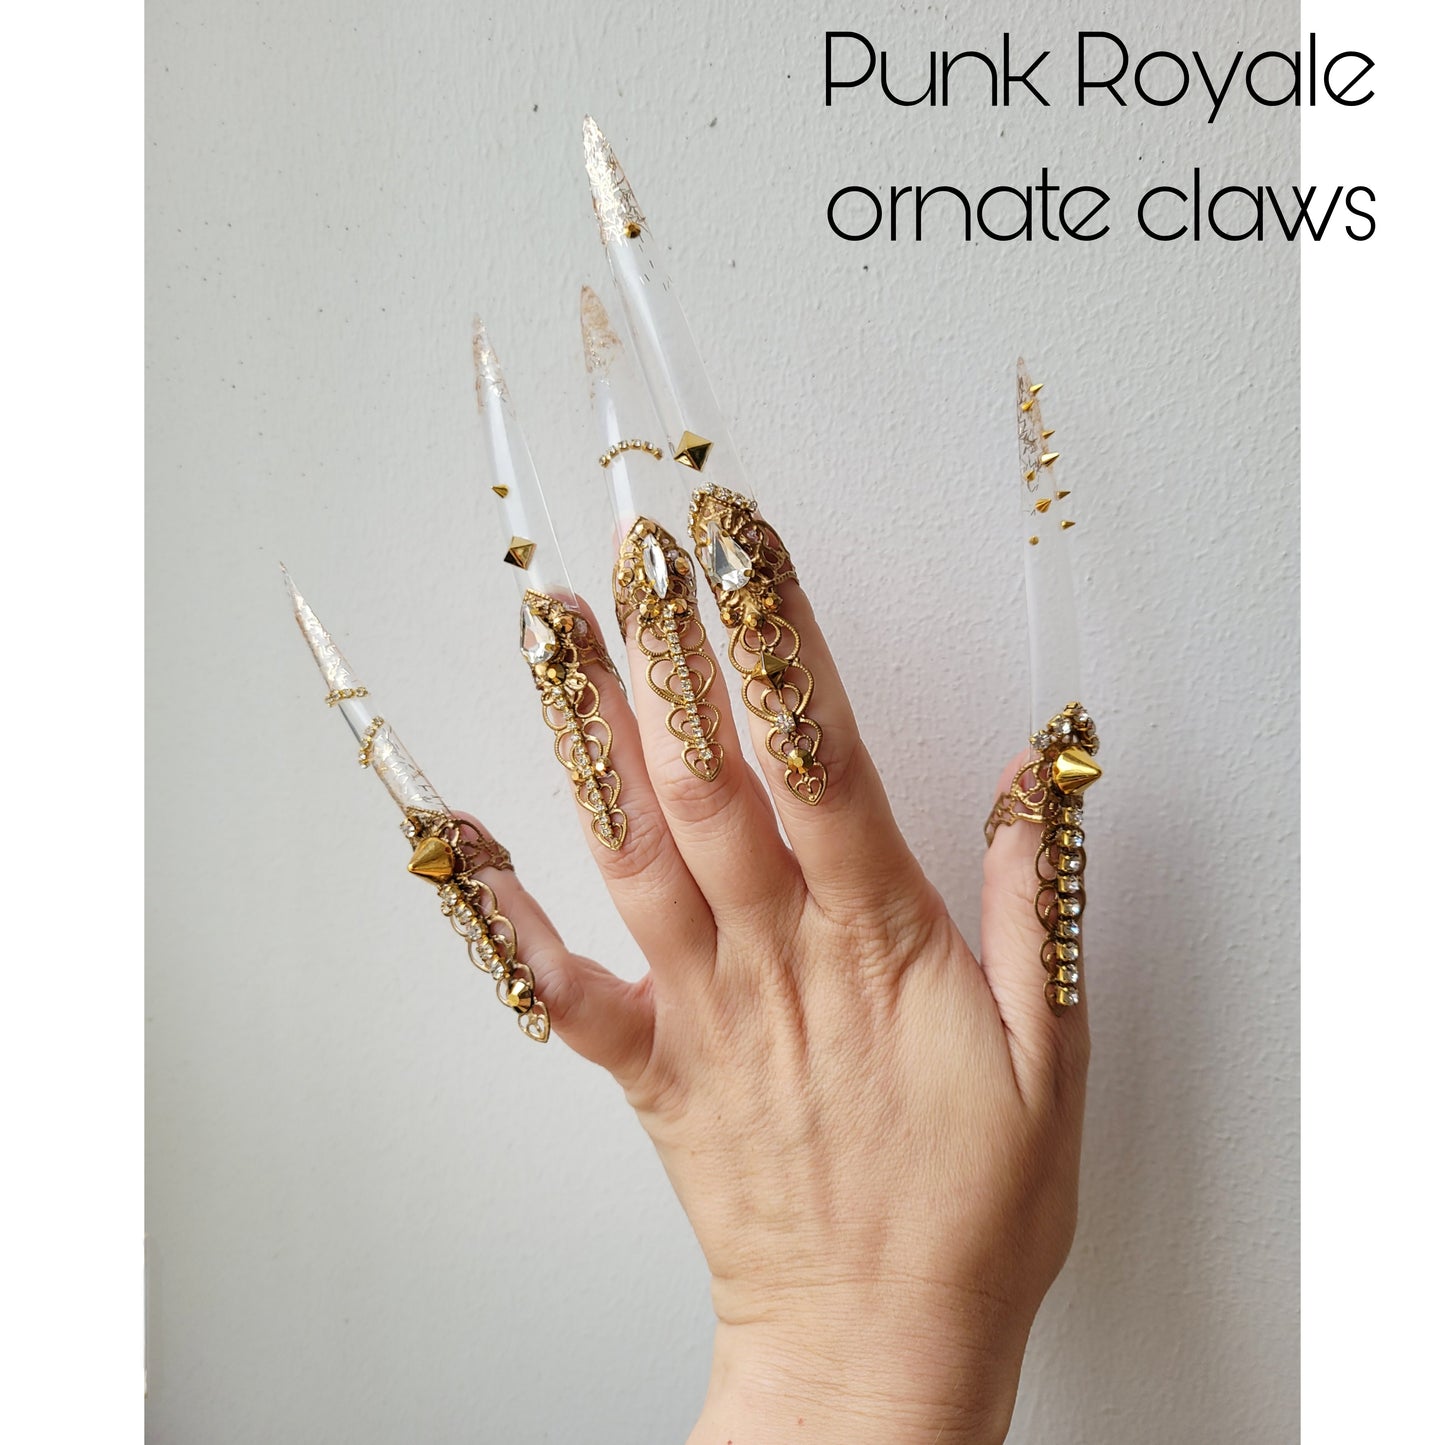 Made-to-order: the Punk Royale ornate claws